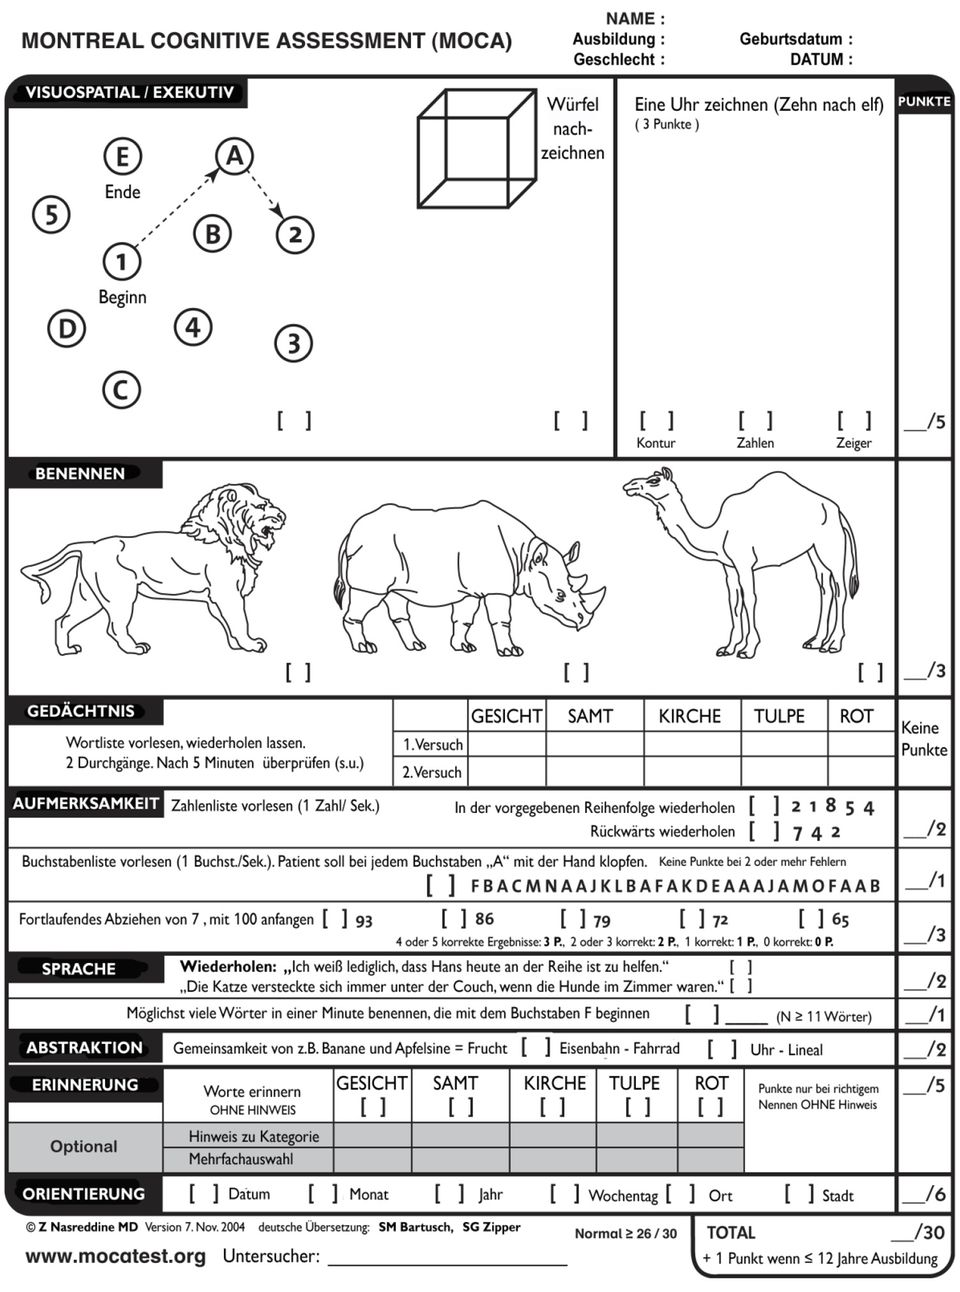 The form for that "Montreal Cognitive Assessment"-Procedure